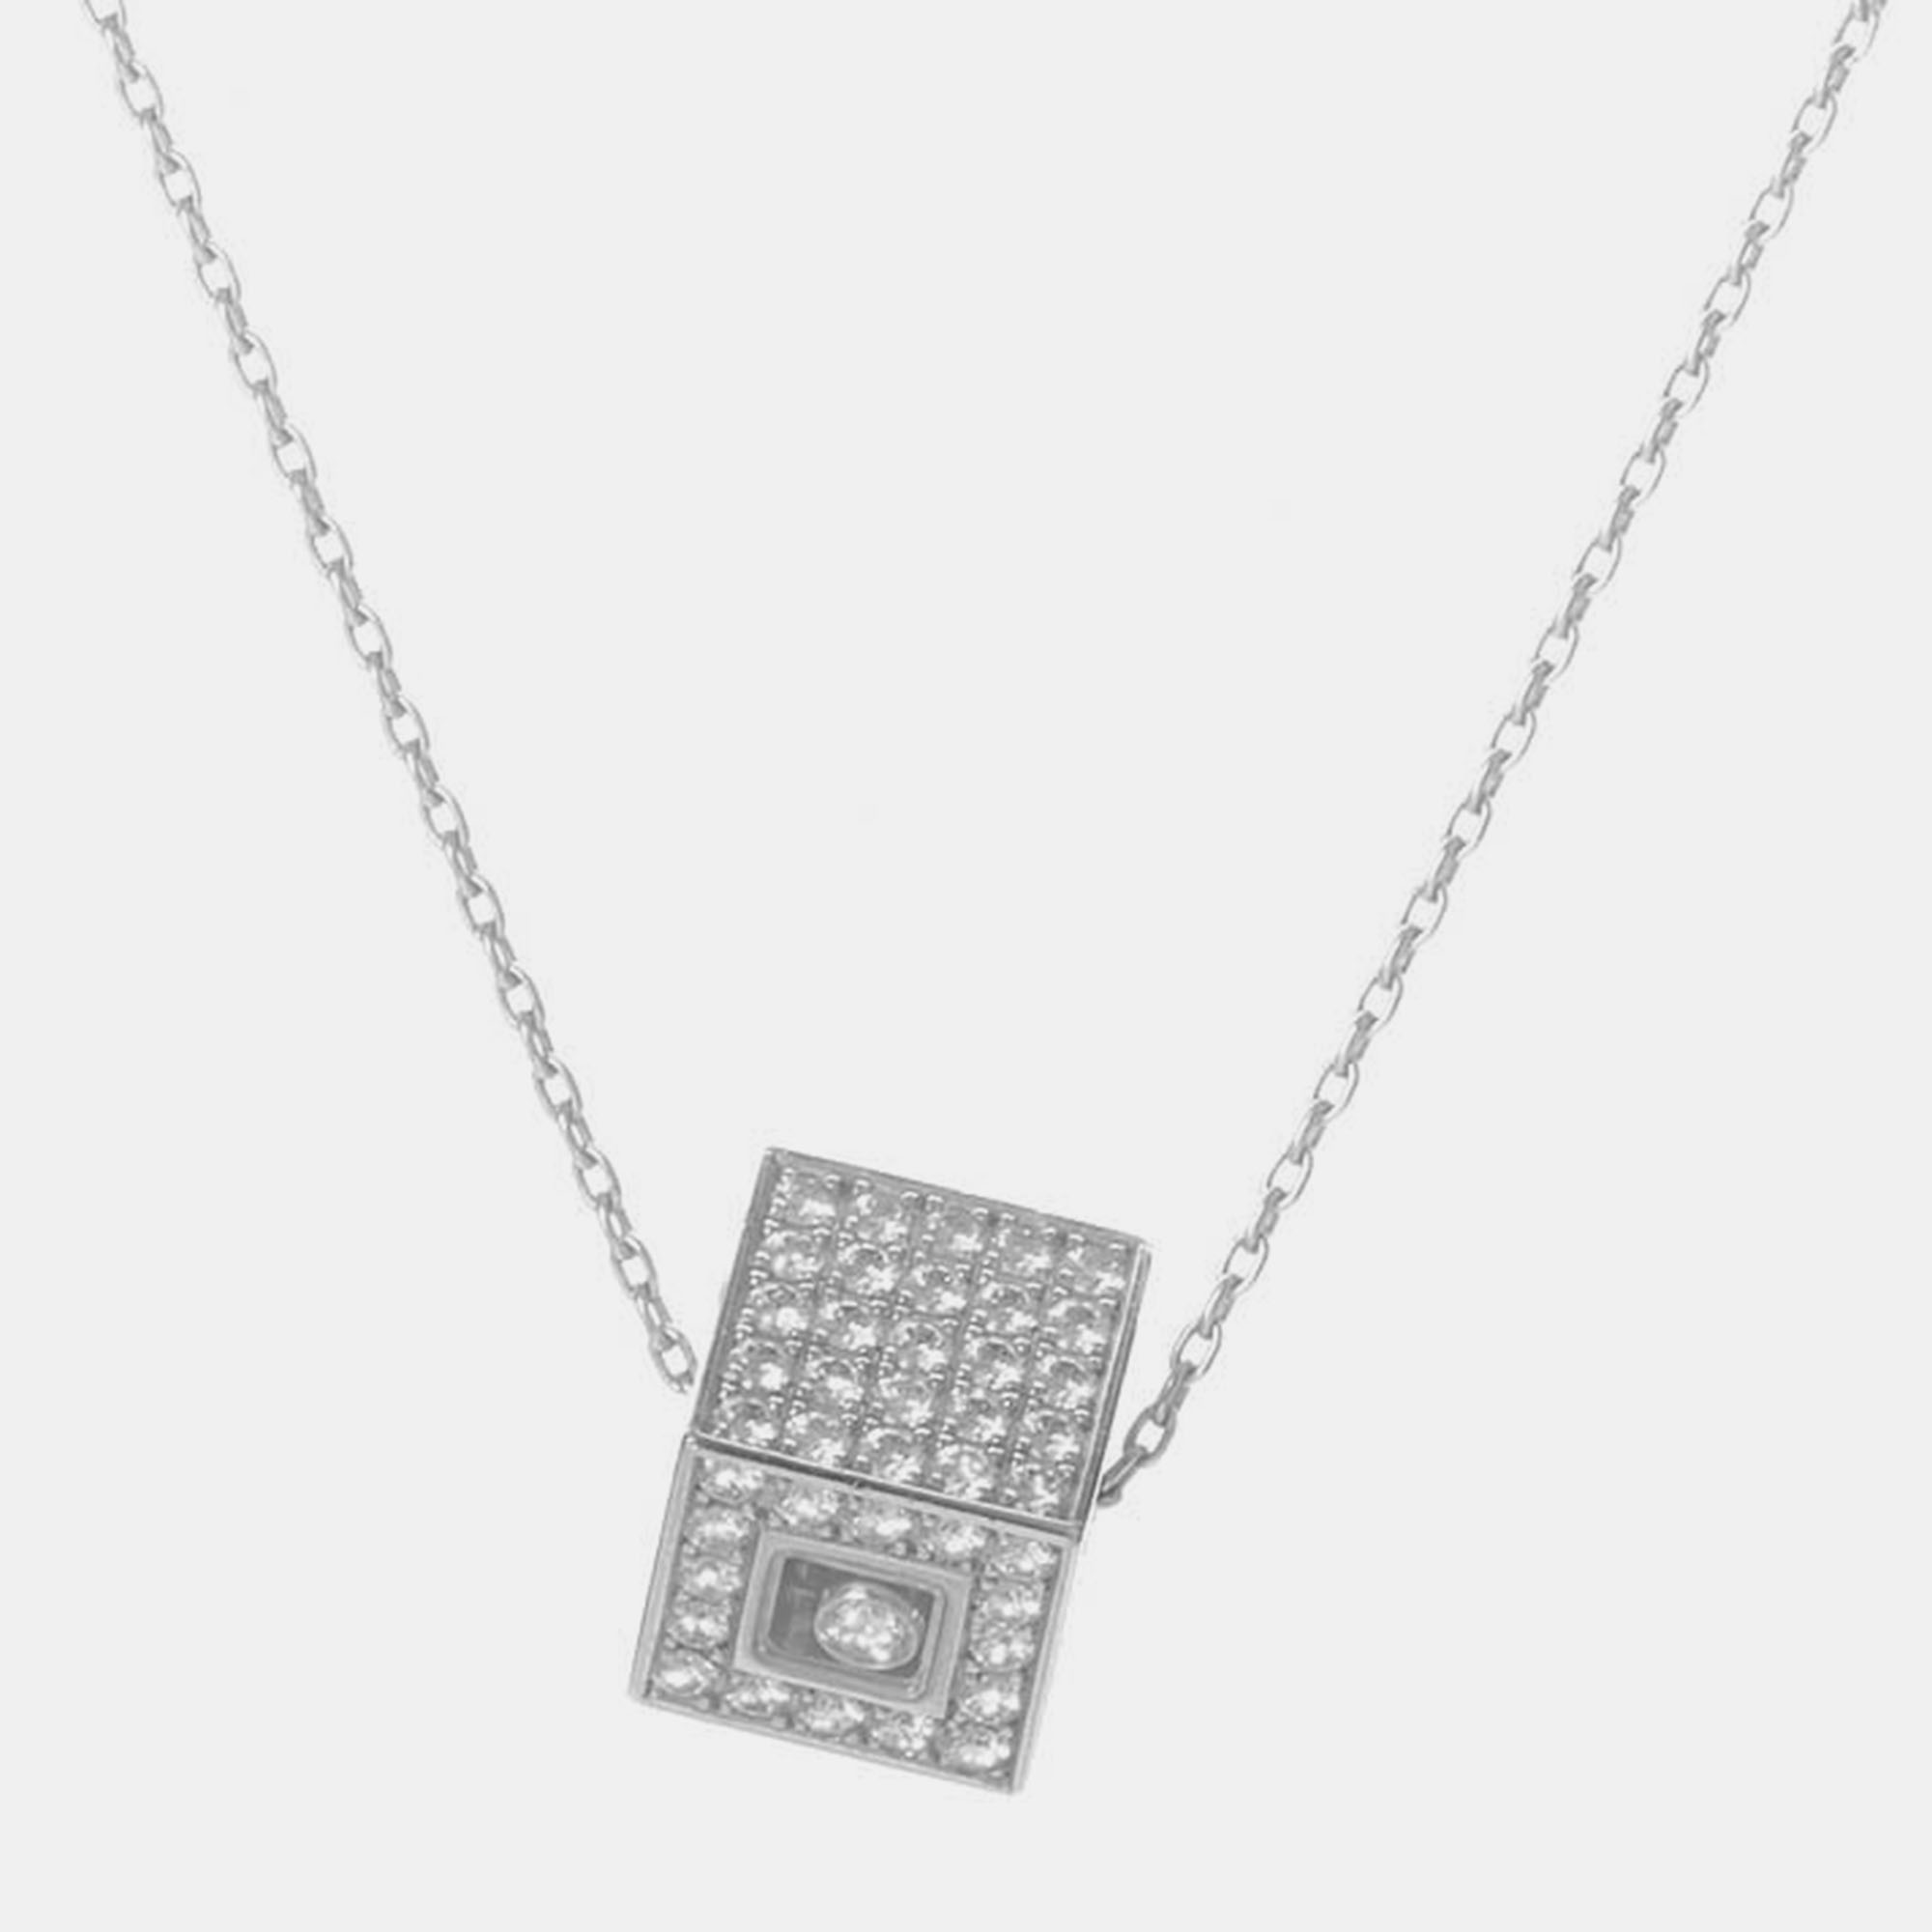 This pendant necklace is luxurious and glamorous. It is made of 18K white gold and boasts a cube shaped pendant set with an outstanding diamond pave.